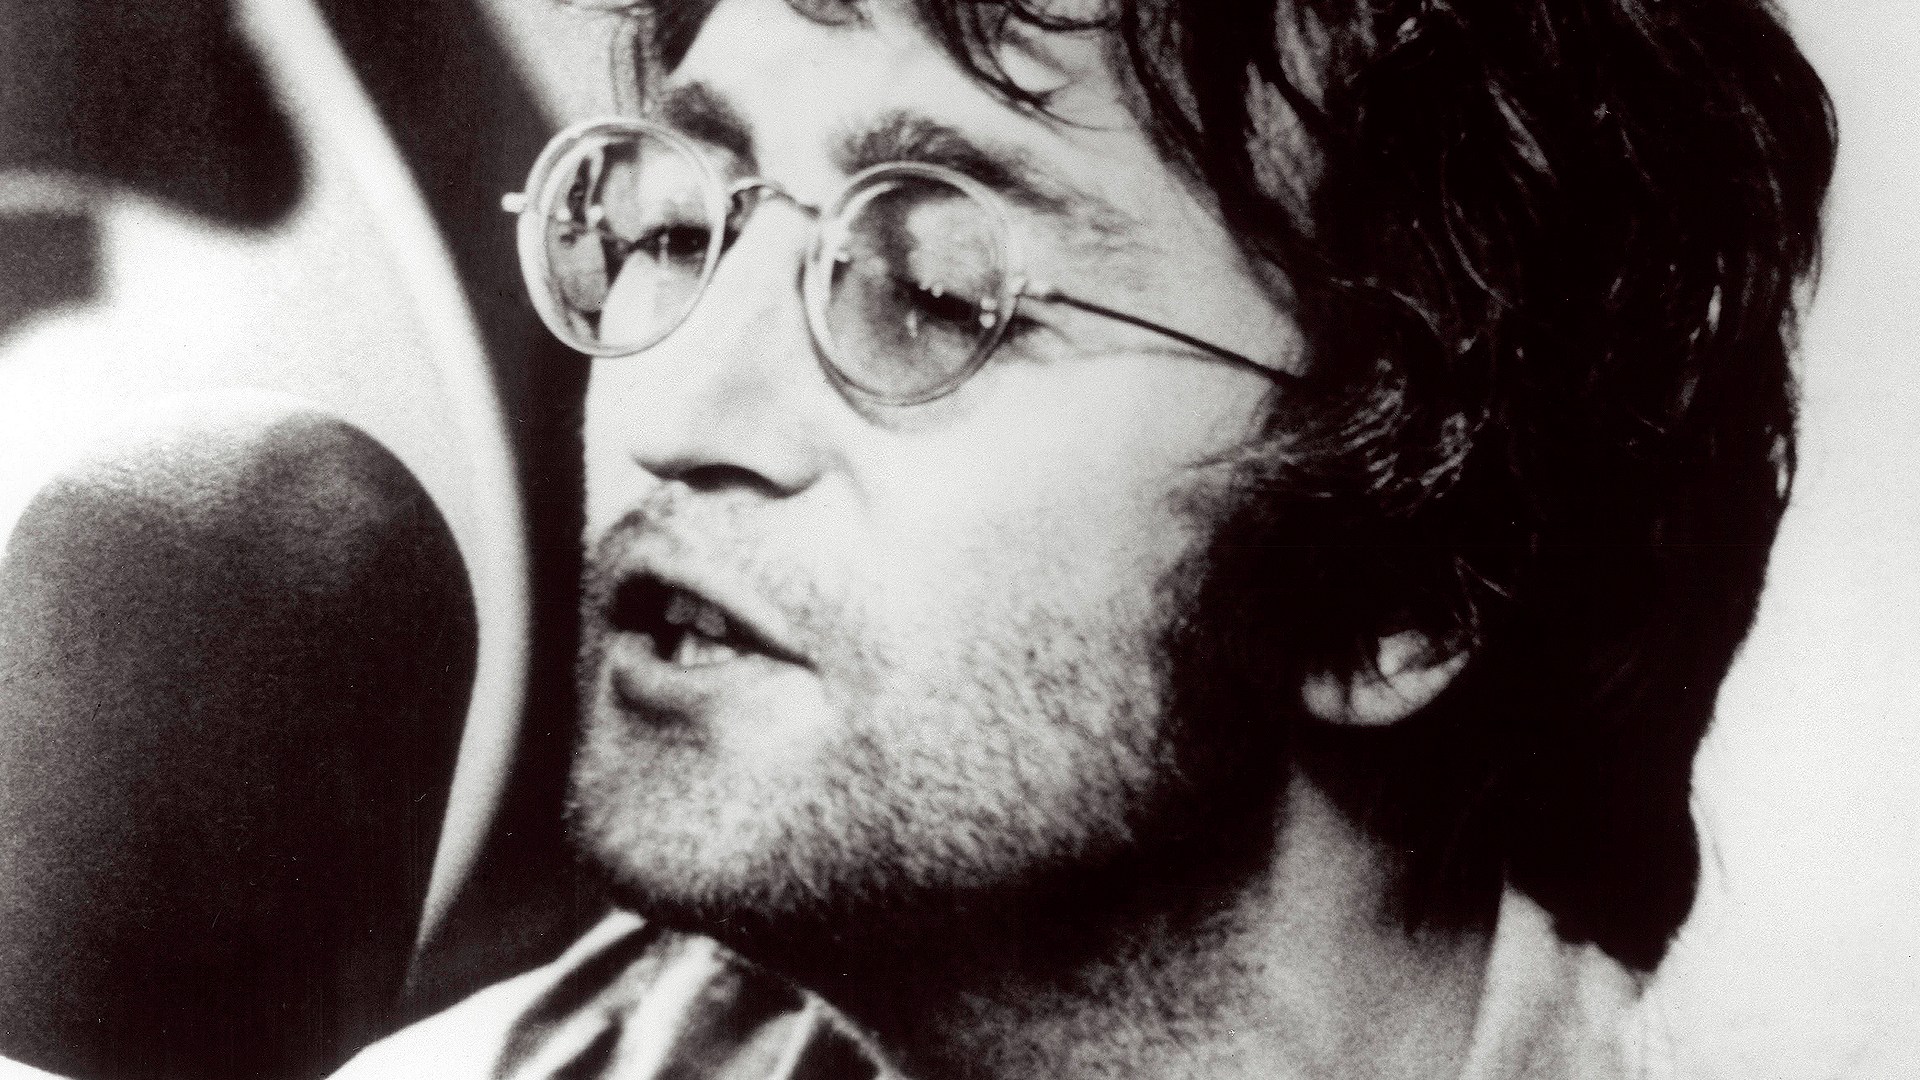 Lennon's schoolyard mischief revealed by auctioned files